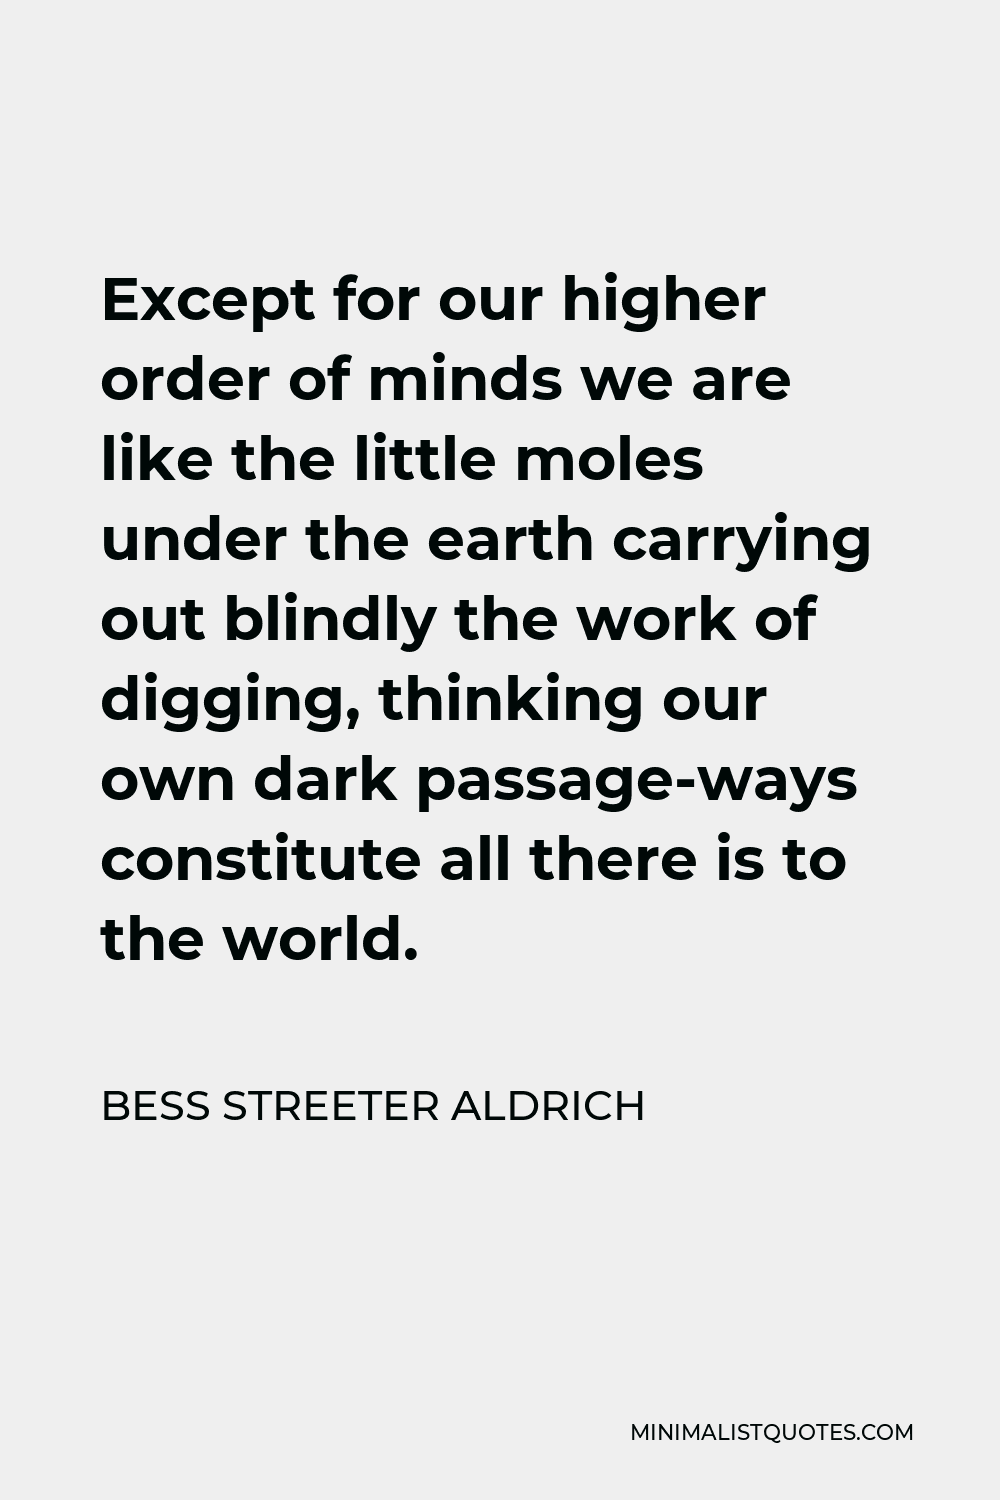 Bess Streeter Aldrich Quote - Except for our higher order of minds we are like the little moles under the earth carrying out blindly the work of digging, thinking our own dark passage-ways constitute all there is to the world.